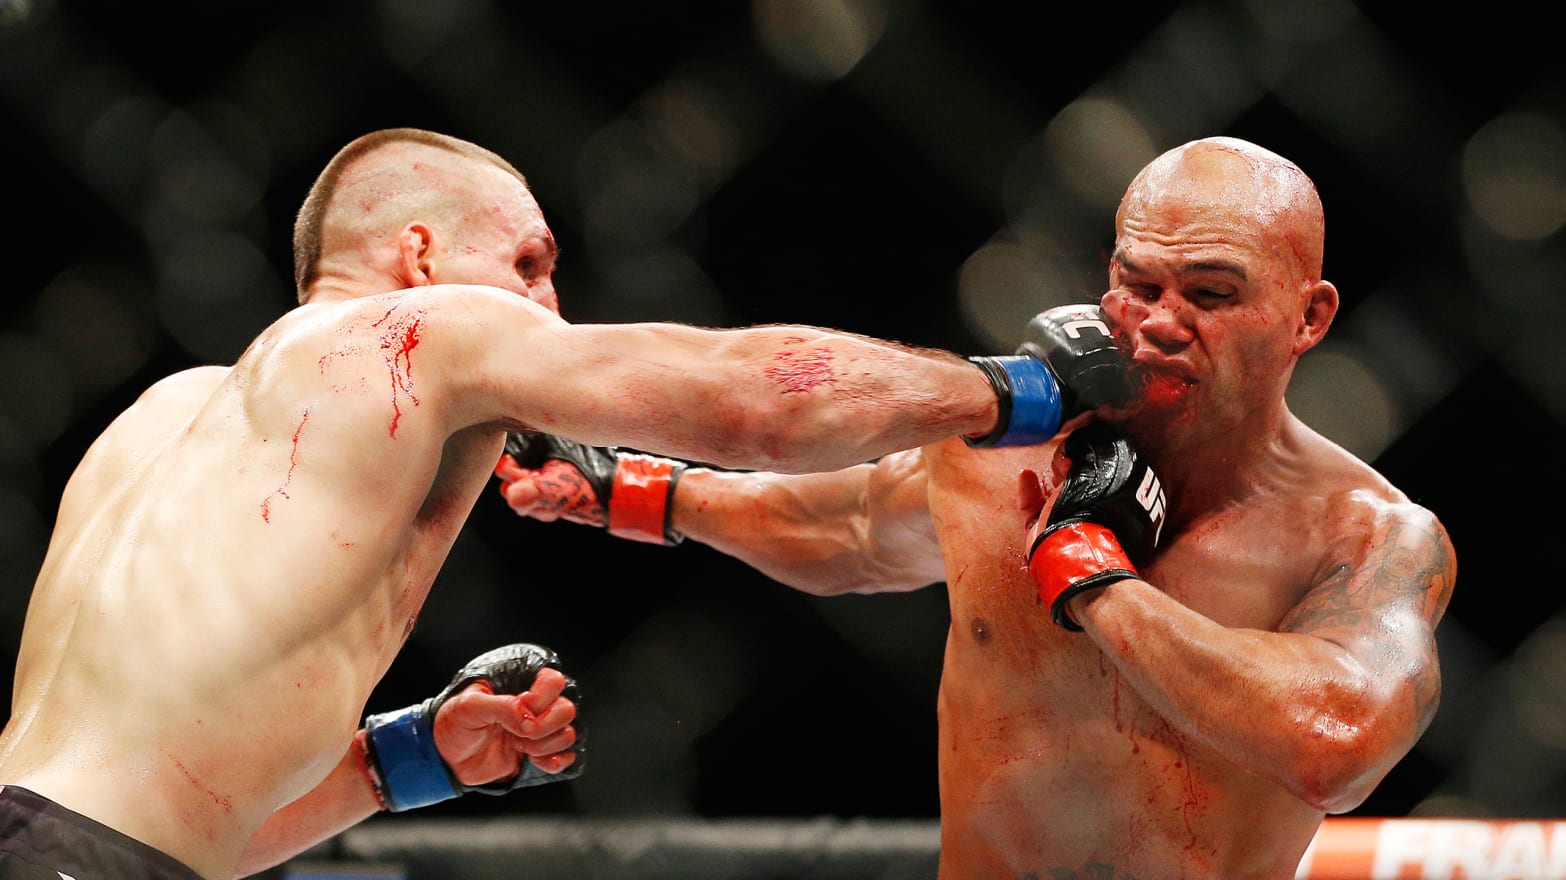 Hey UFC, Bring Back Bare-knuckle to Stop Brain Trauma Fights